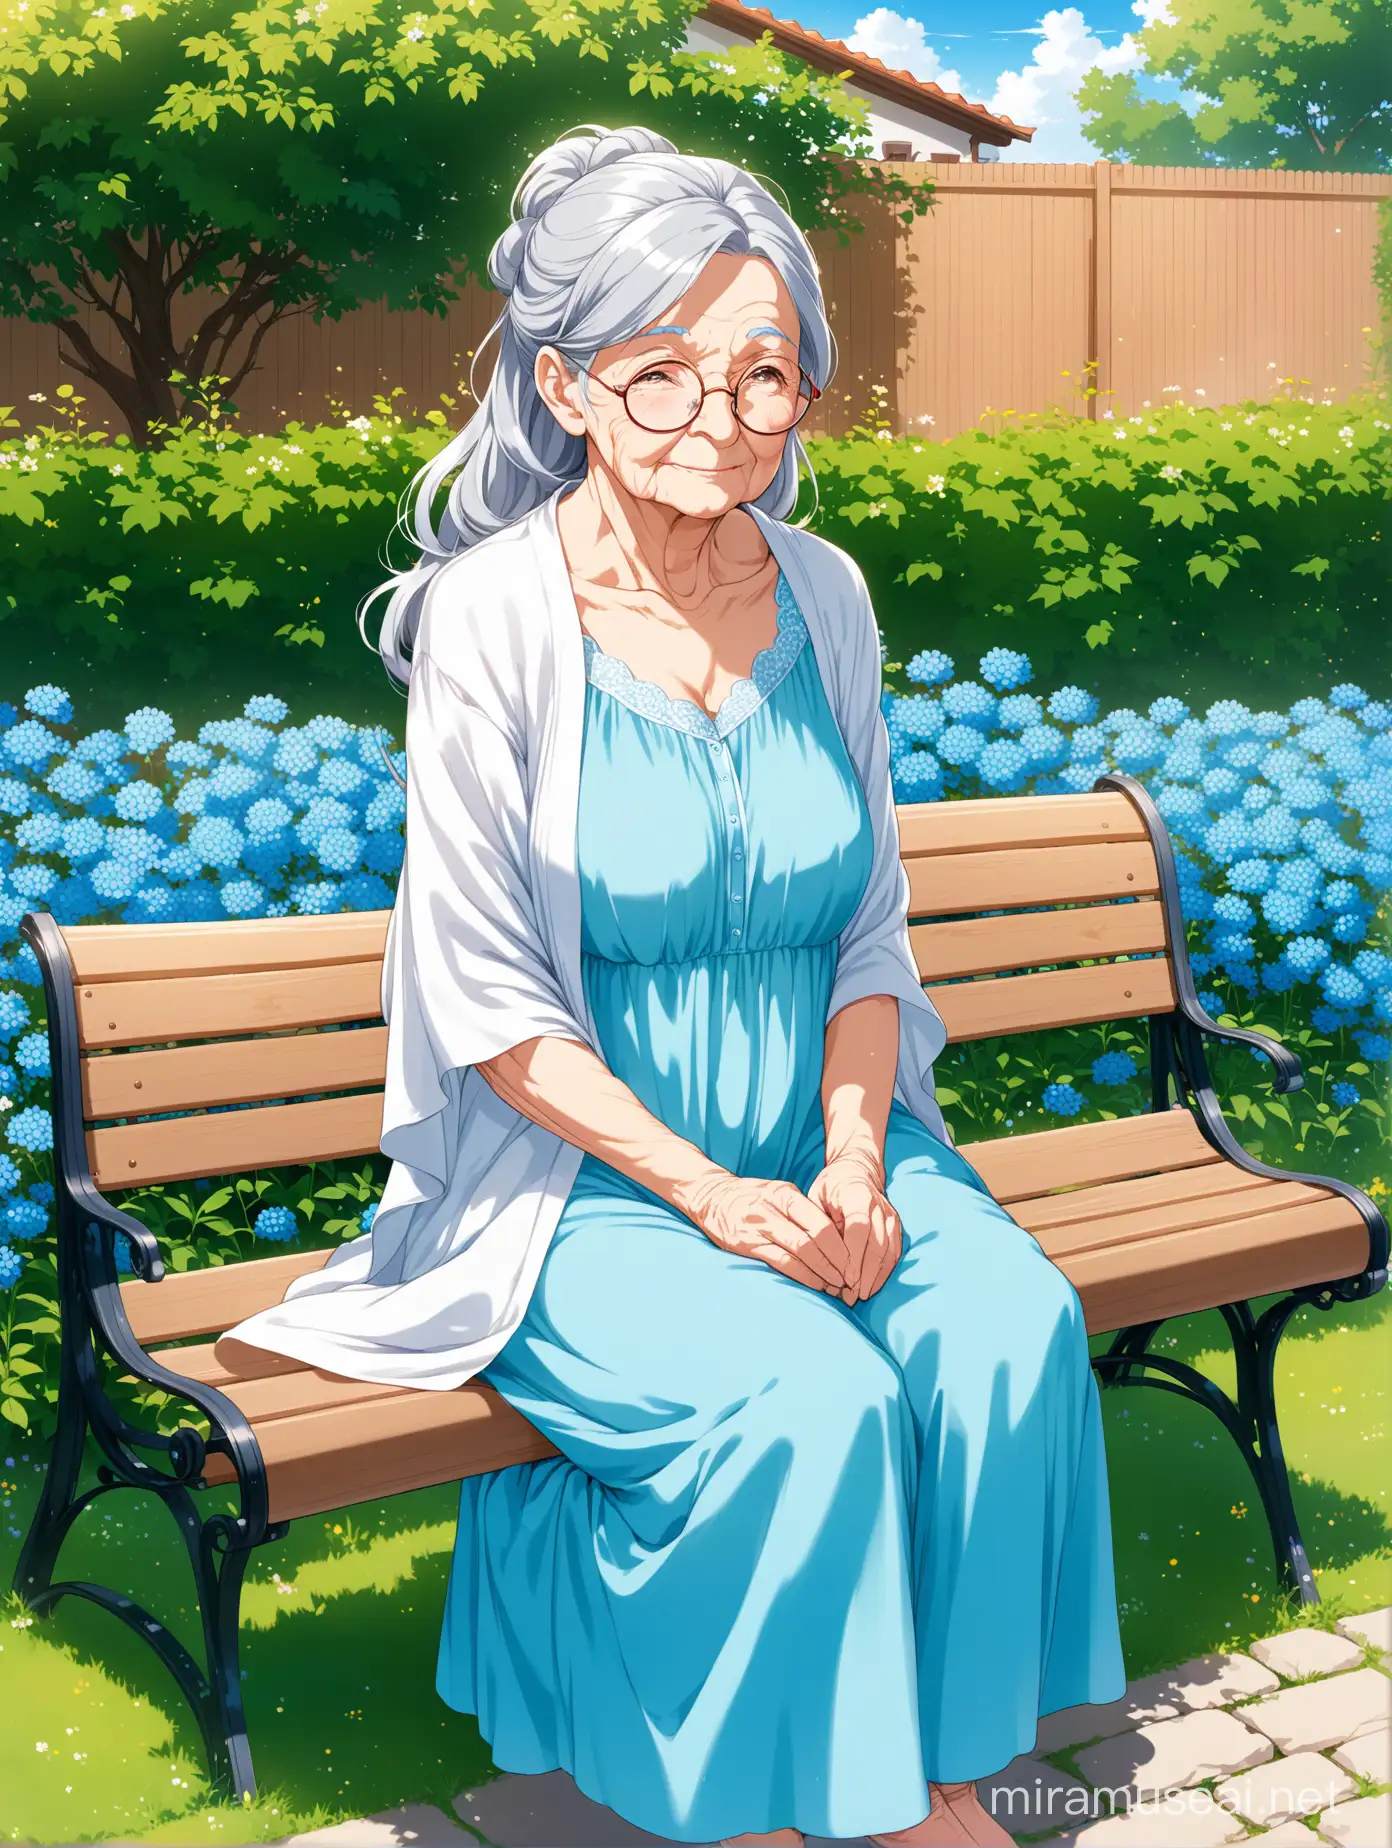 Anime, Old lady, wrinkled, with long gray hair, wearing light blue nightgown, white shawl, round glasses, friendly, sitting on a bench, backyard, garden with blue flowers.